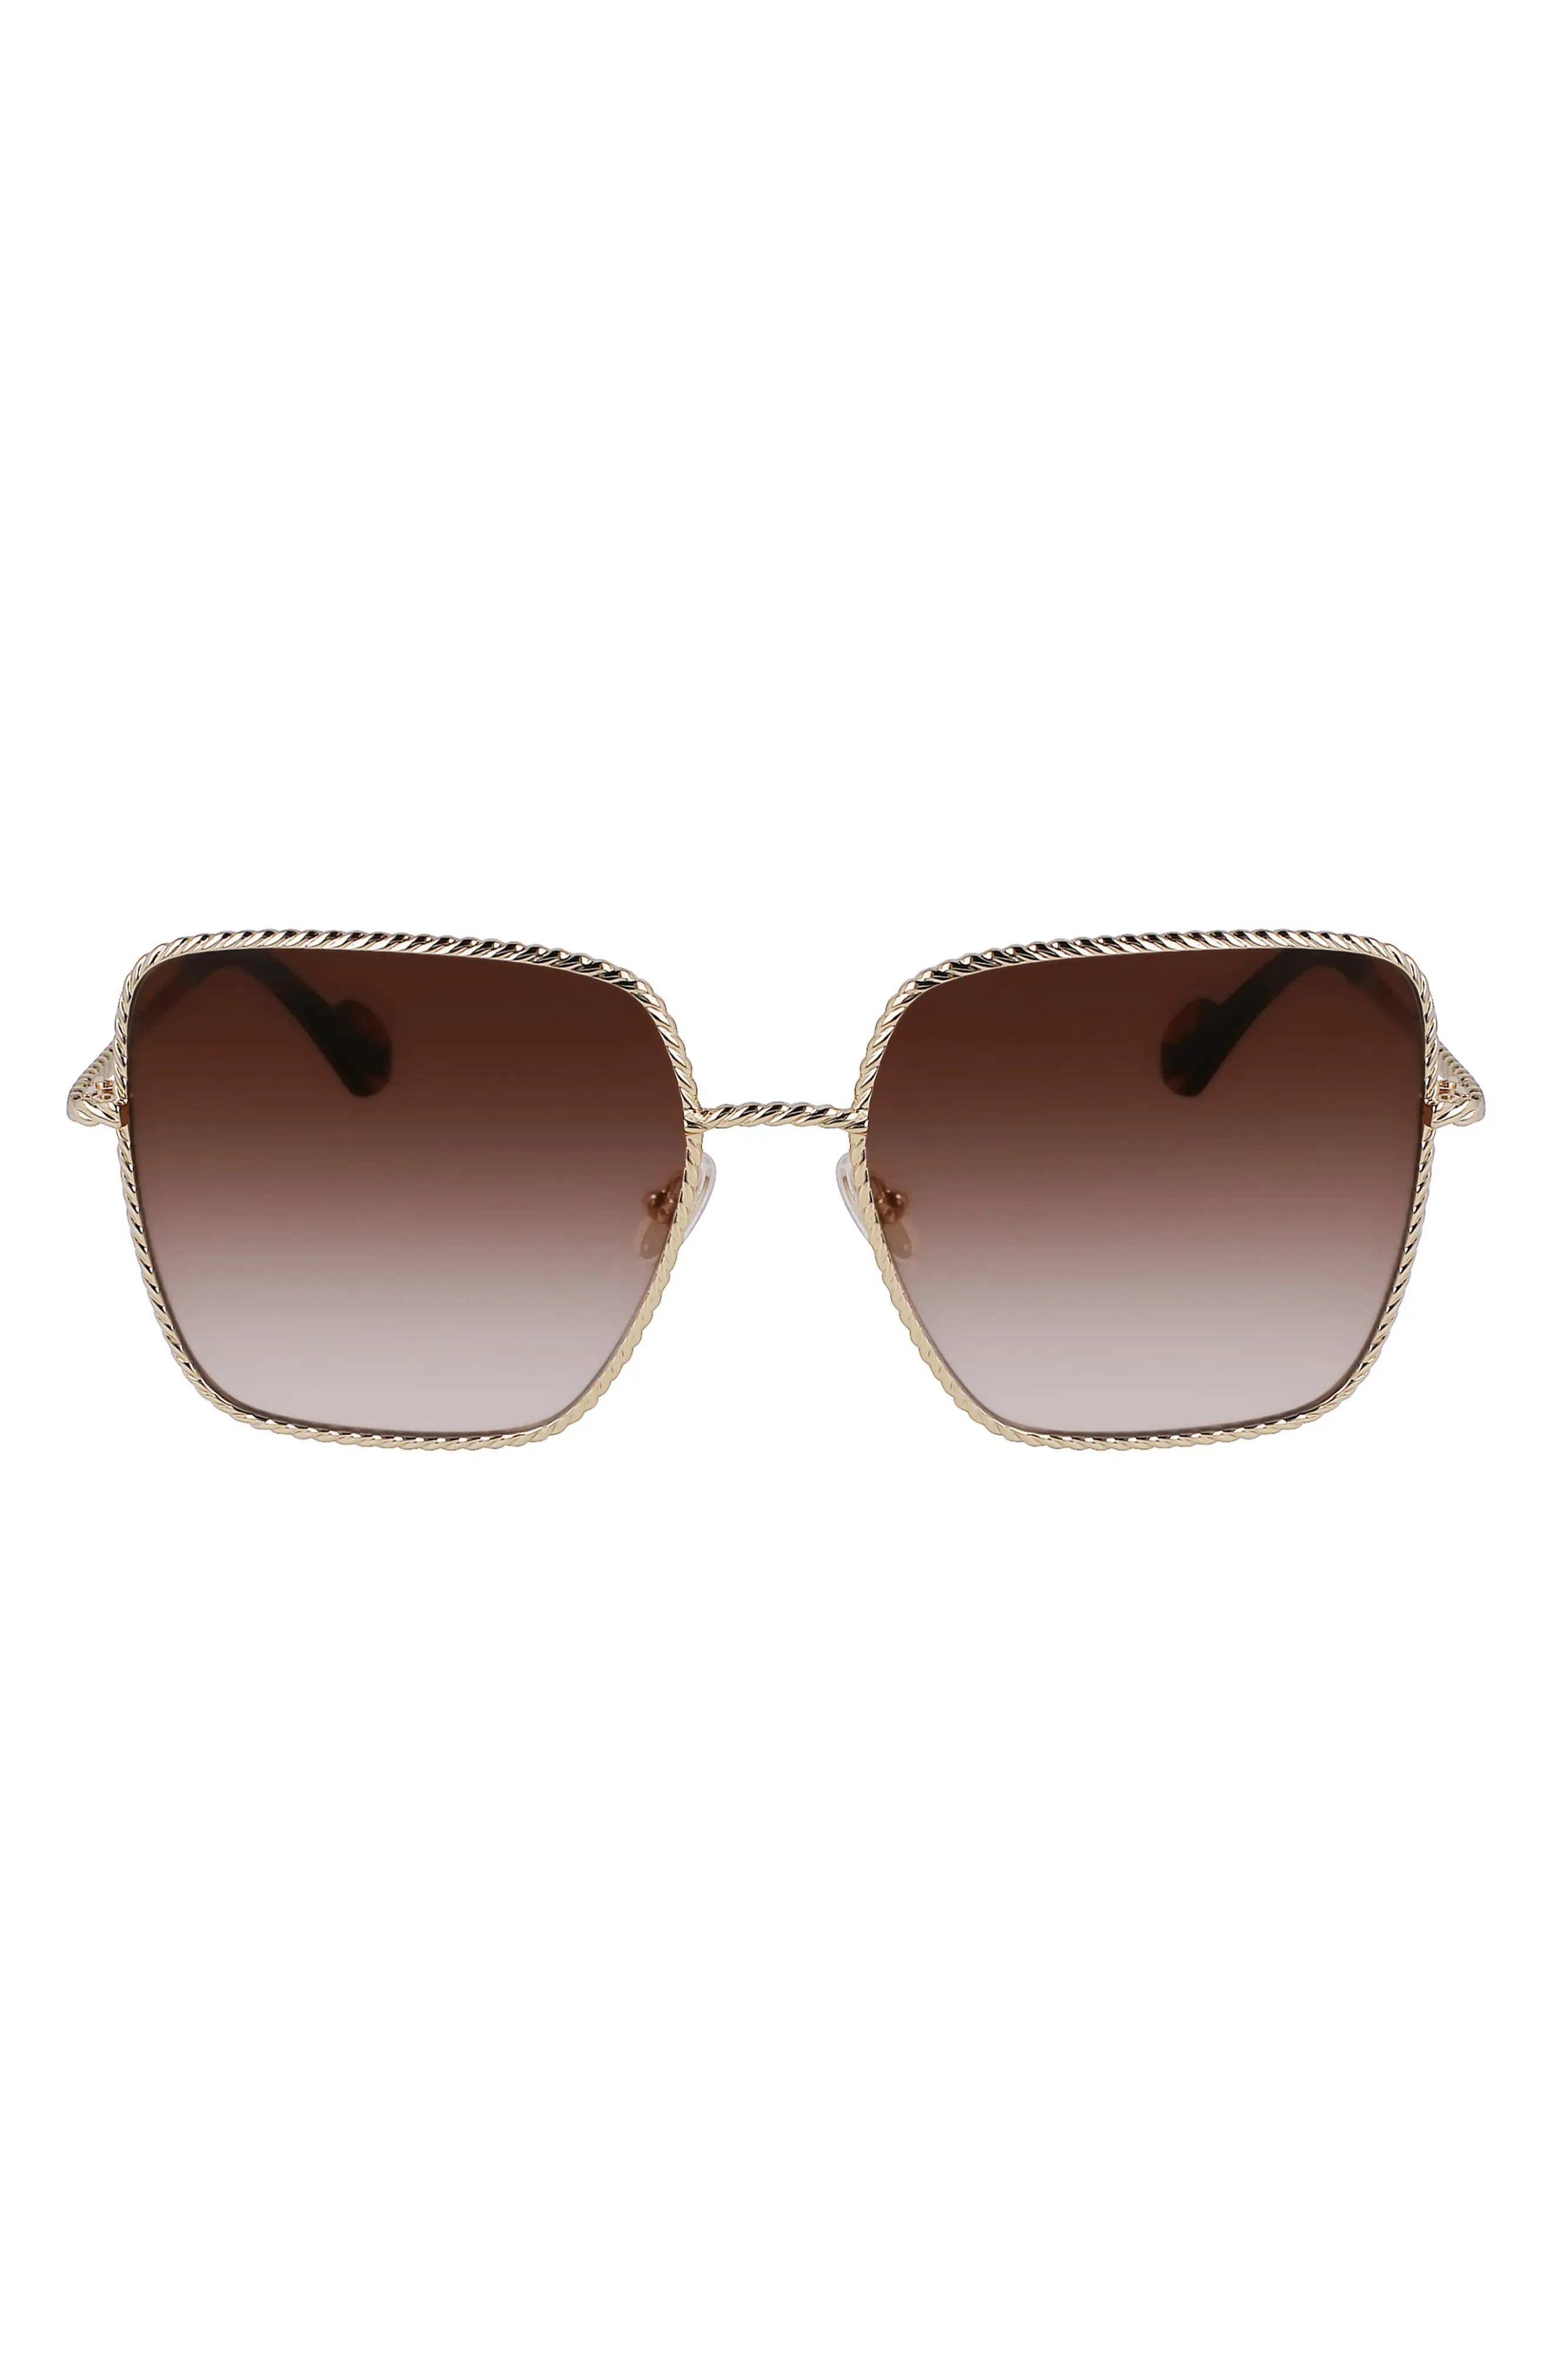 Babe 59mm Gradient Square Sunglasses in Gold/Gradient Brown - 1